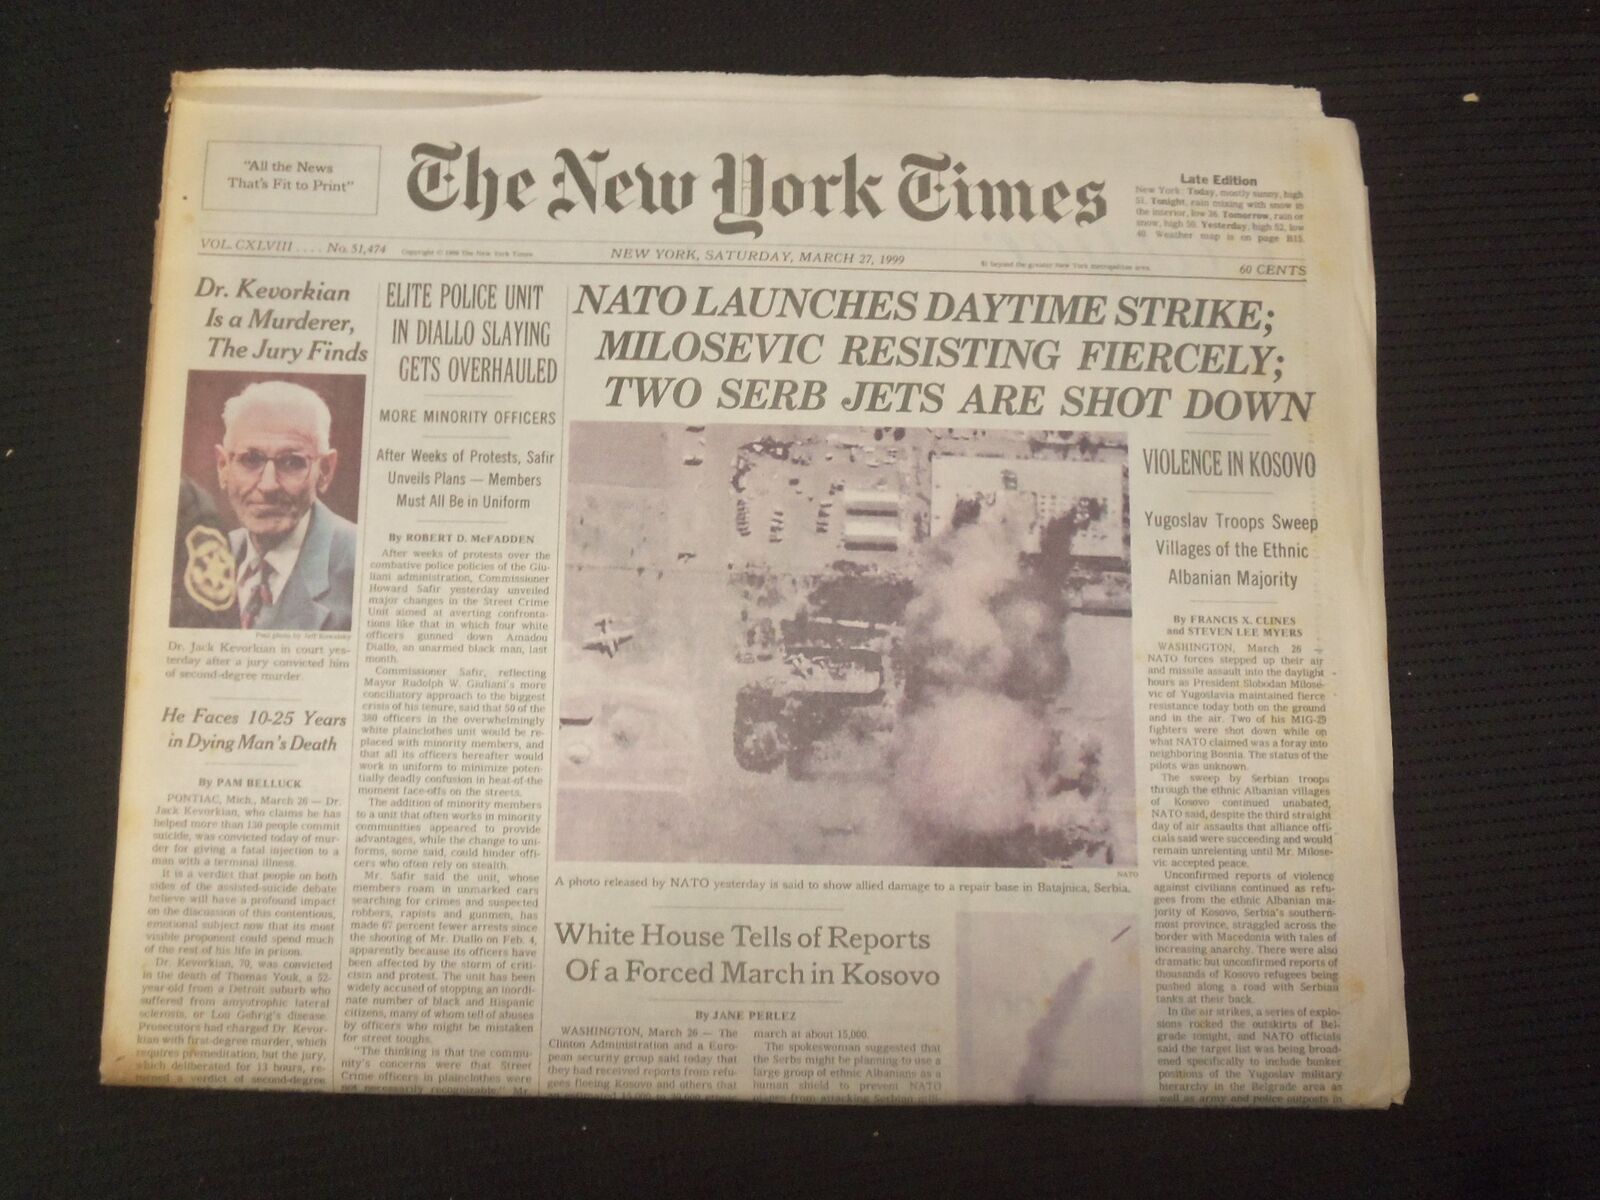 1999 MAR 27 NEW YORK TIMES NEWSPAPER -NATO LAUNCHES STRIKE, 2 SERB JETS- NP 6972